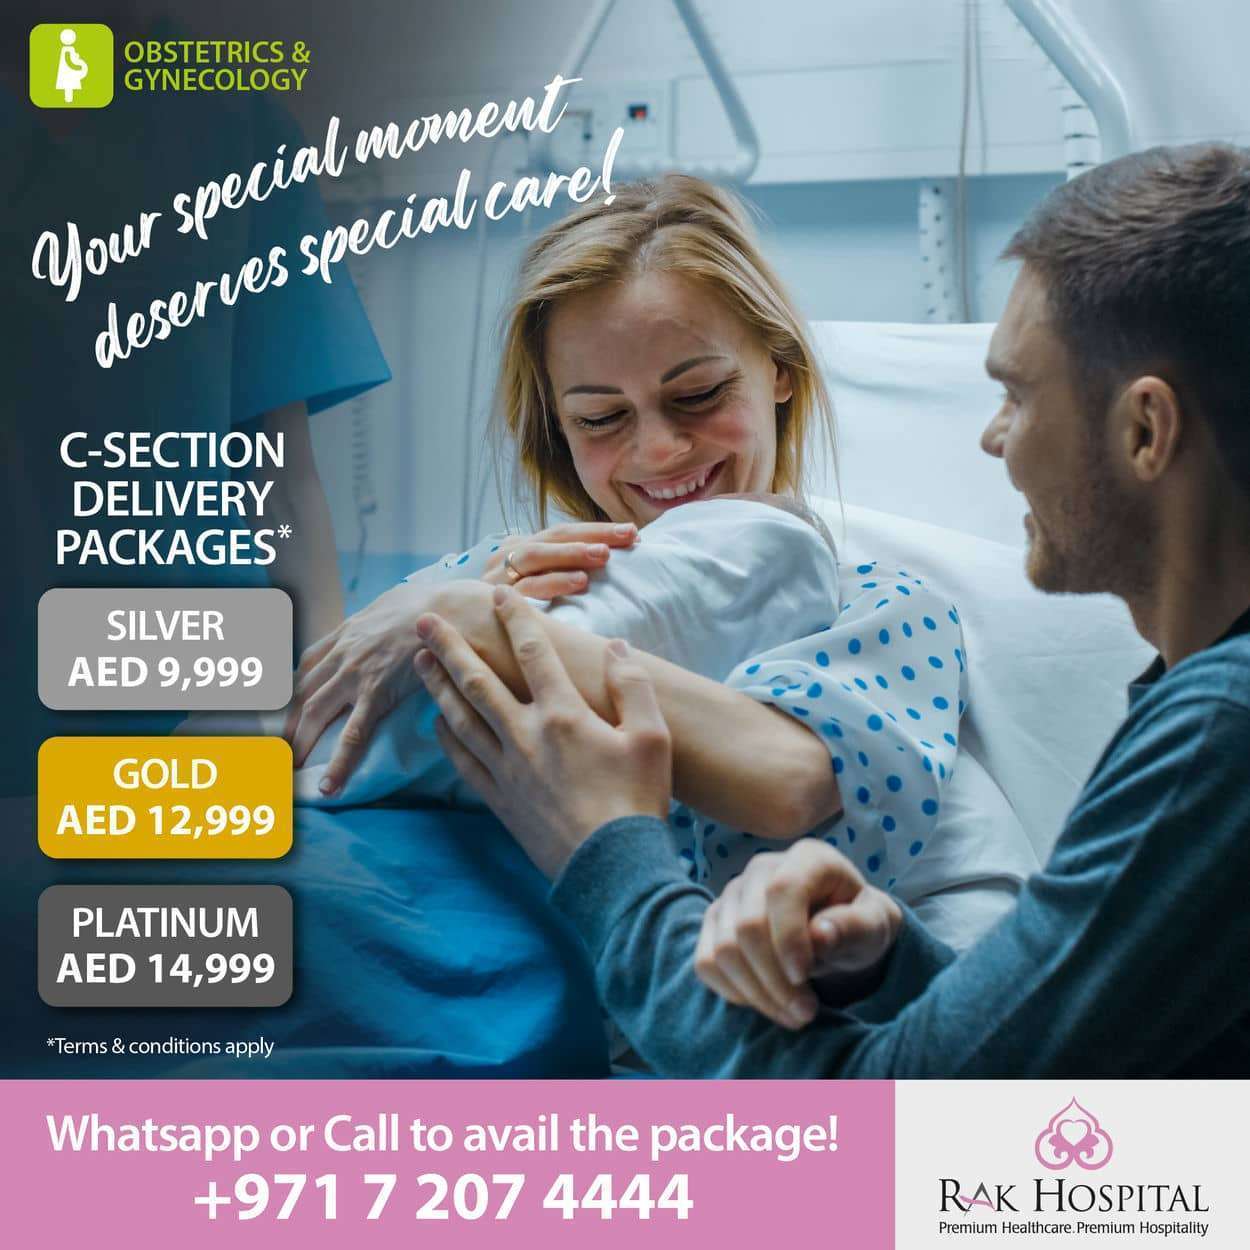 C-Section Delivery Package